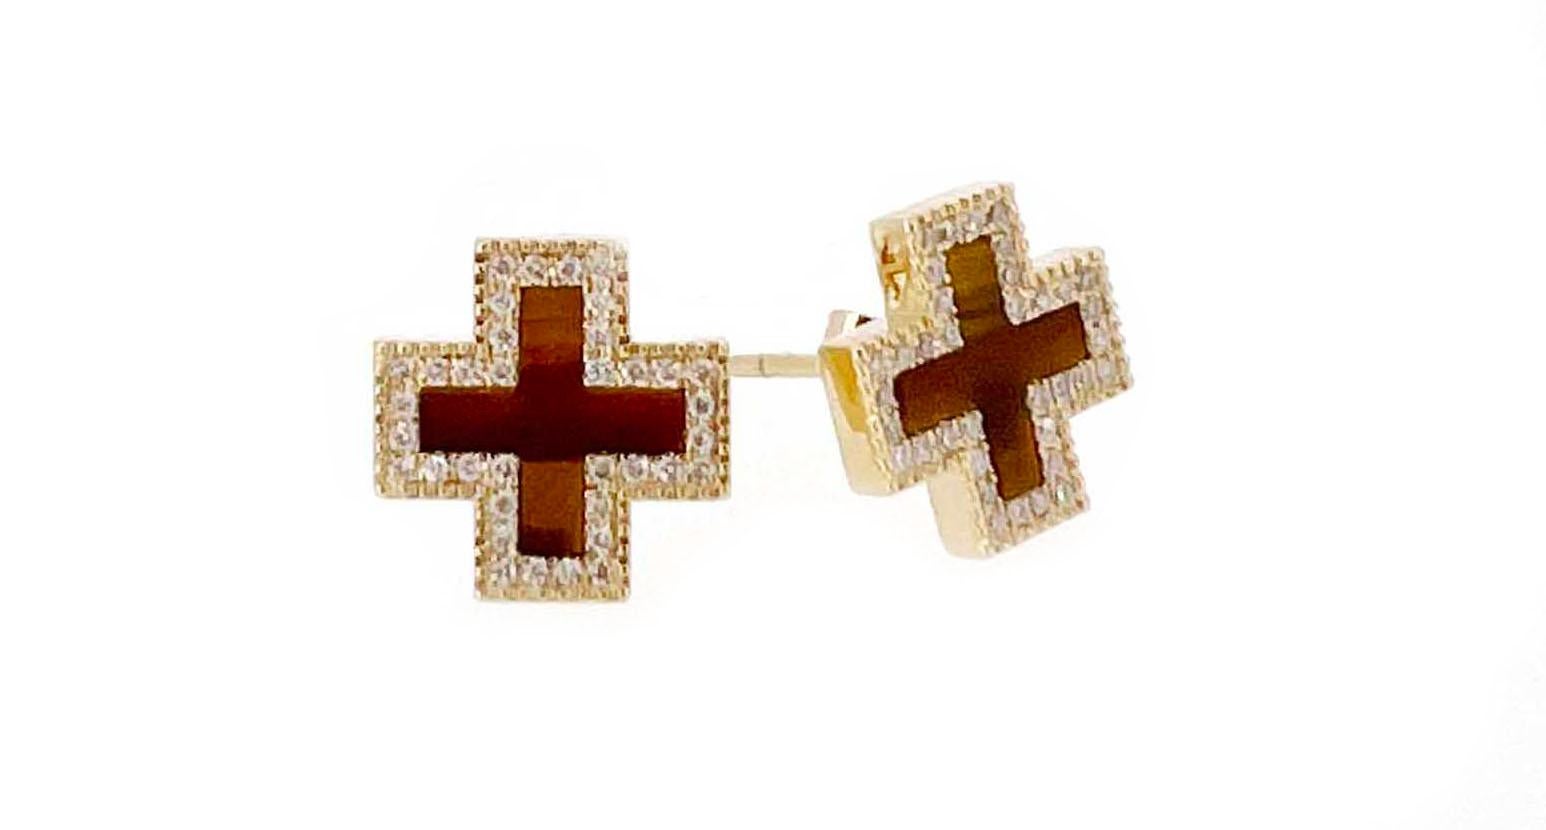 A twist on our best-selling Heirloom Stud Earrings, the Pave Tiger Eye Inlay Heirloom Studs are a classic staple. These fun classics feature hand-cut tiger eye surrounded by diamonds to fill the ear.

The GATES Collection by M. Flynn is a jewlery